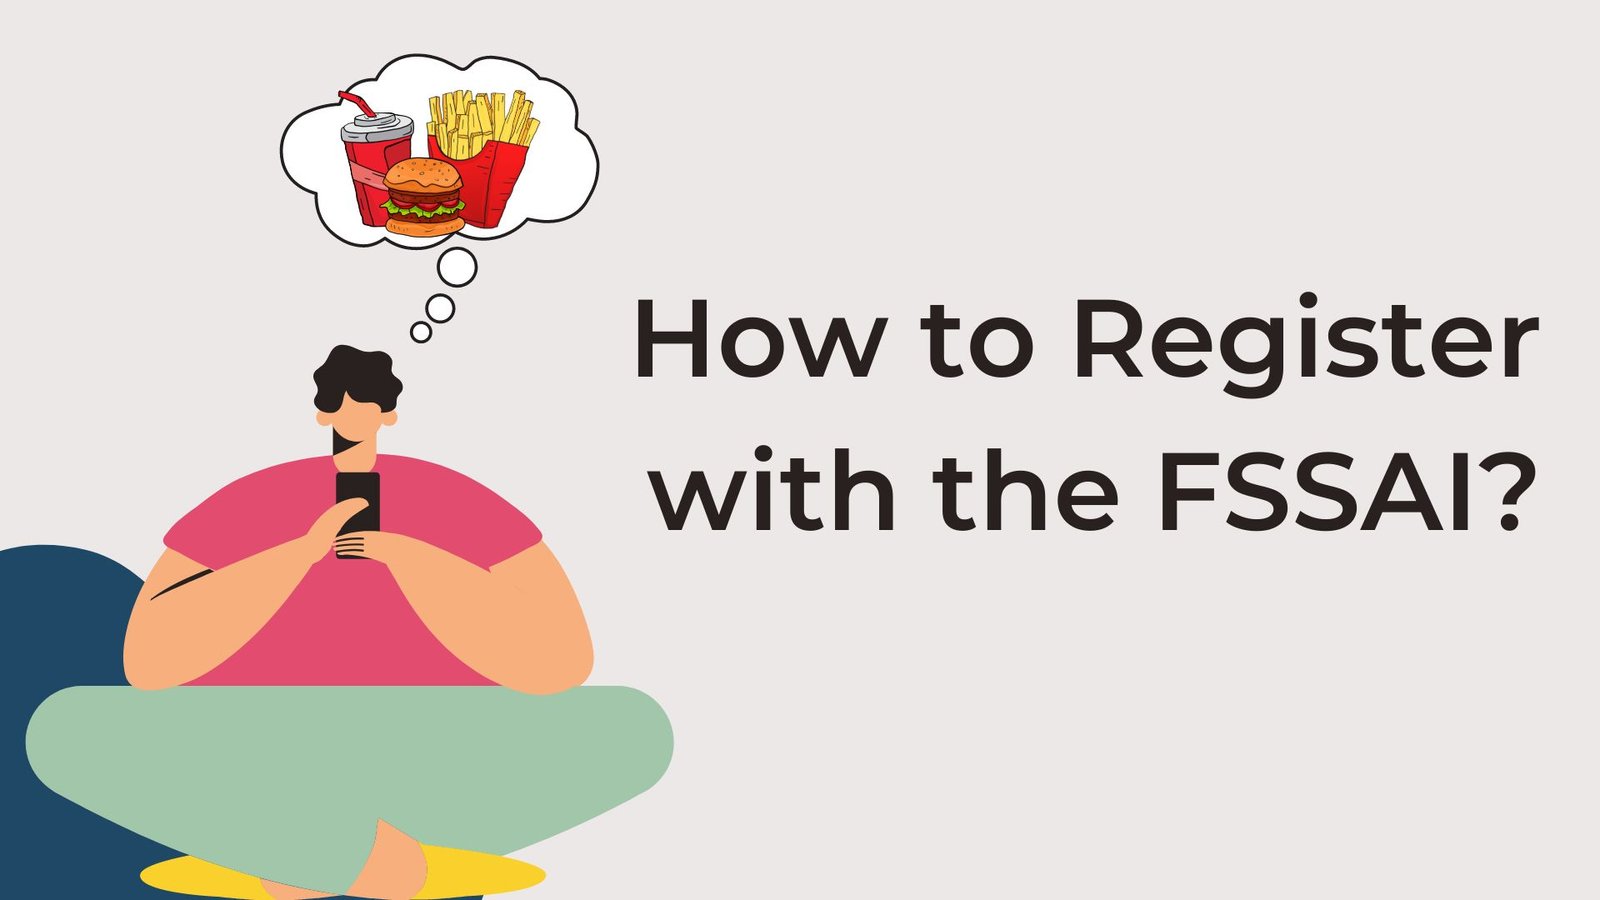 How to Register with the FSSAI? - Finance - Business Hear